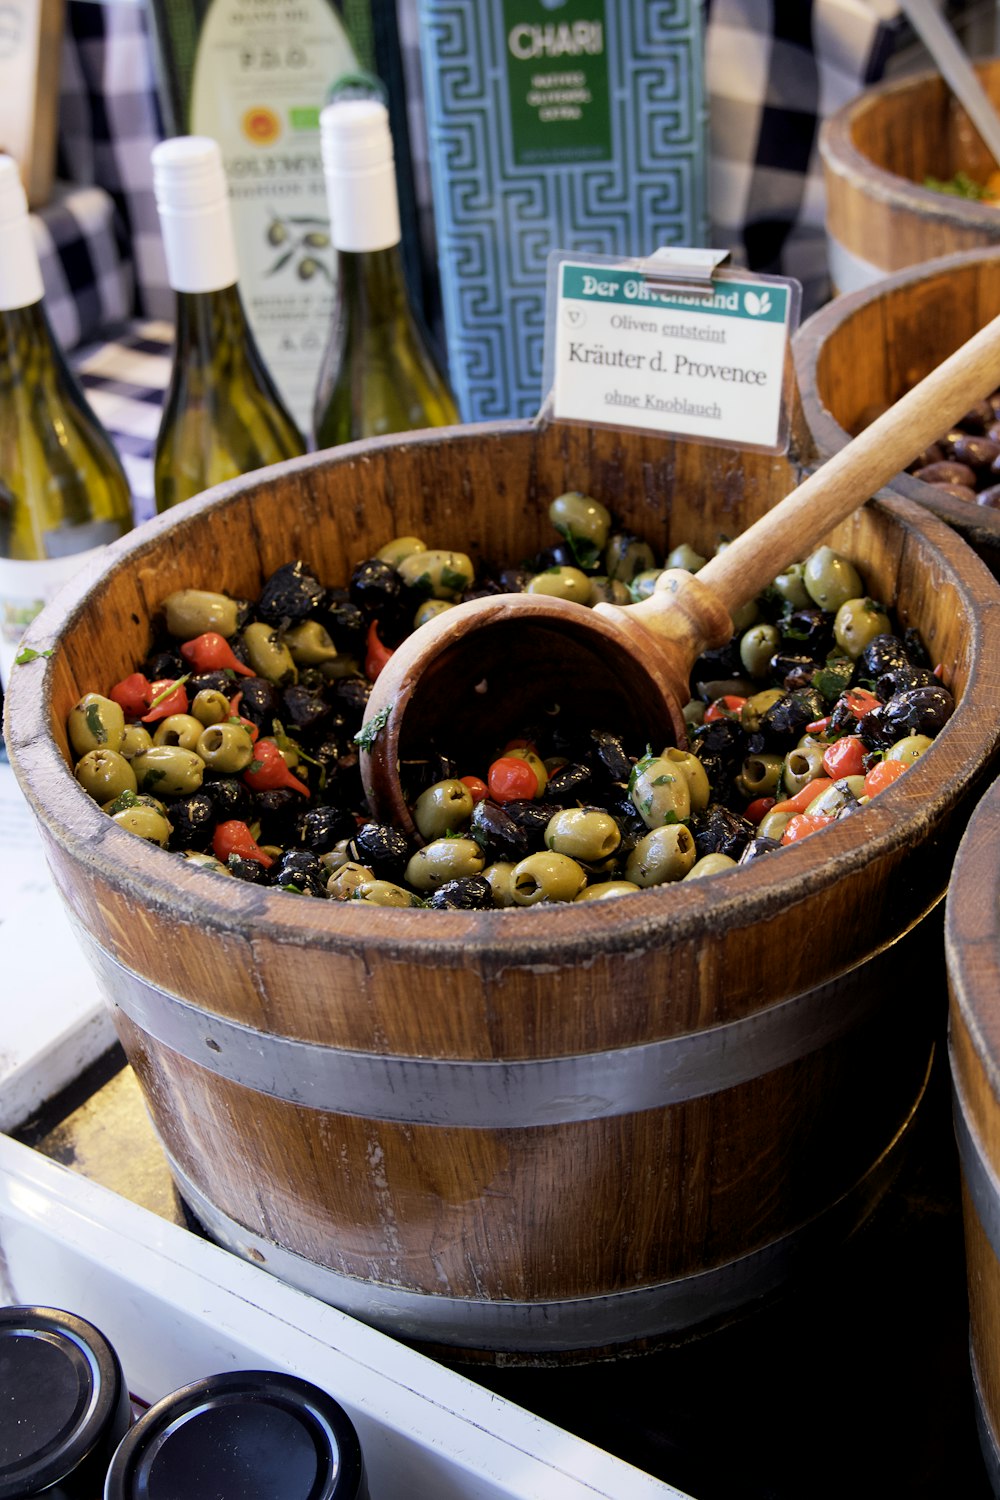 a wooden bucket filled with olives next to bottles of wine